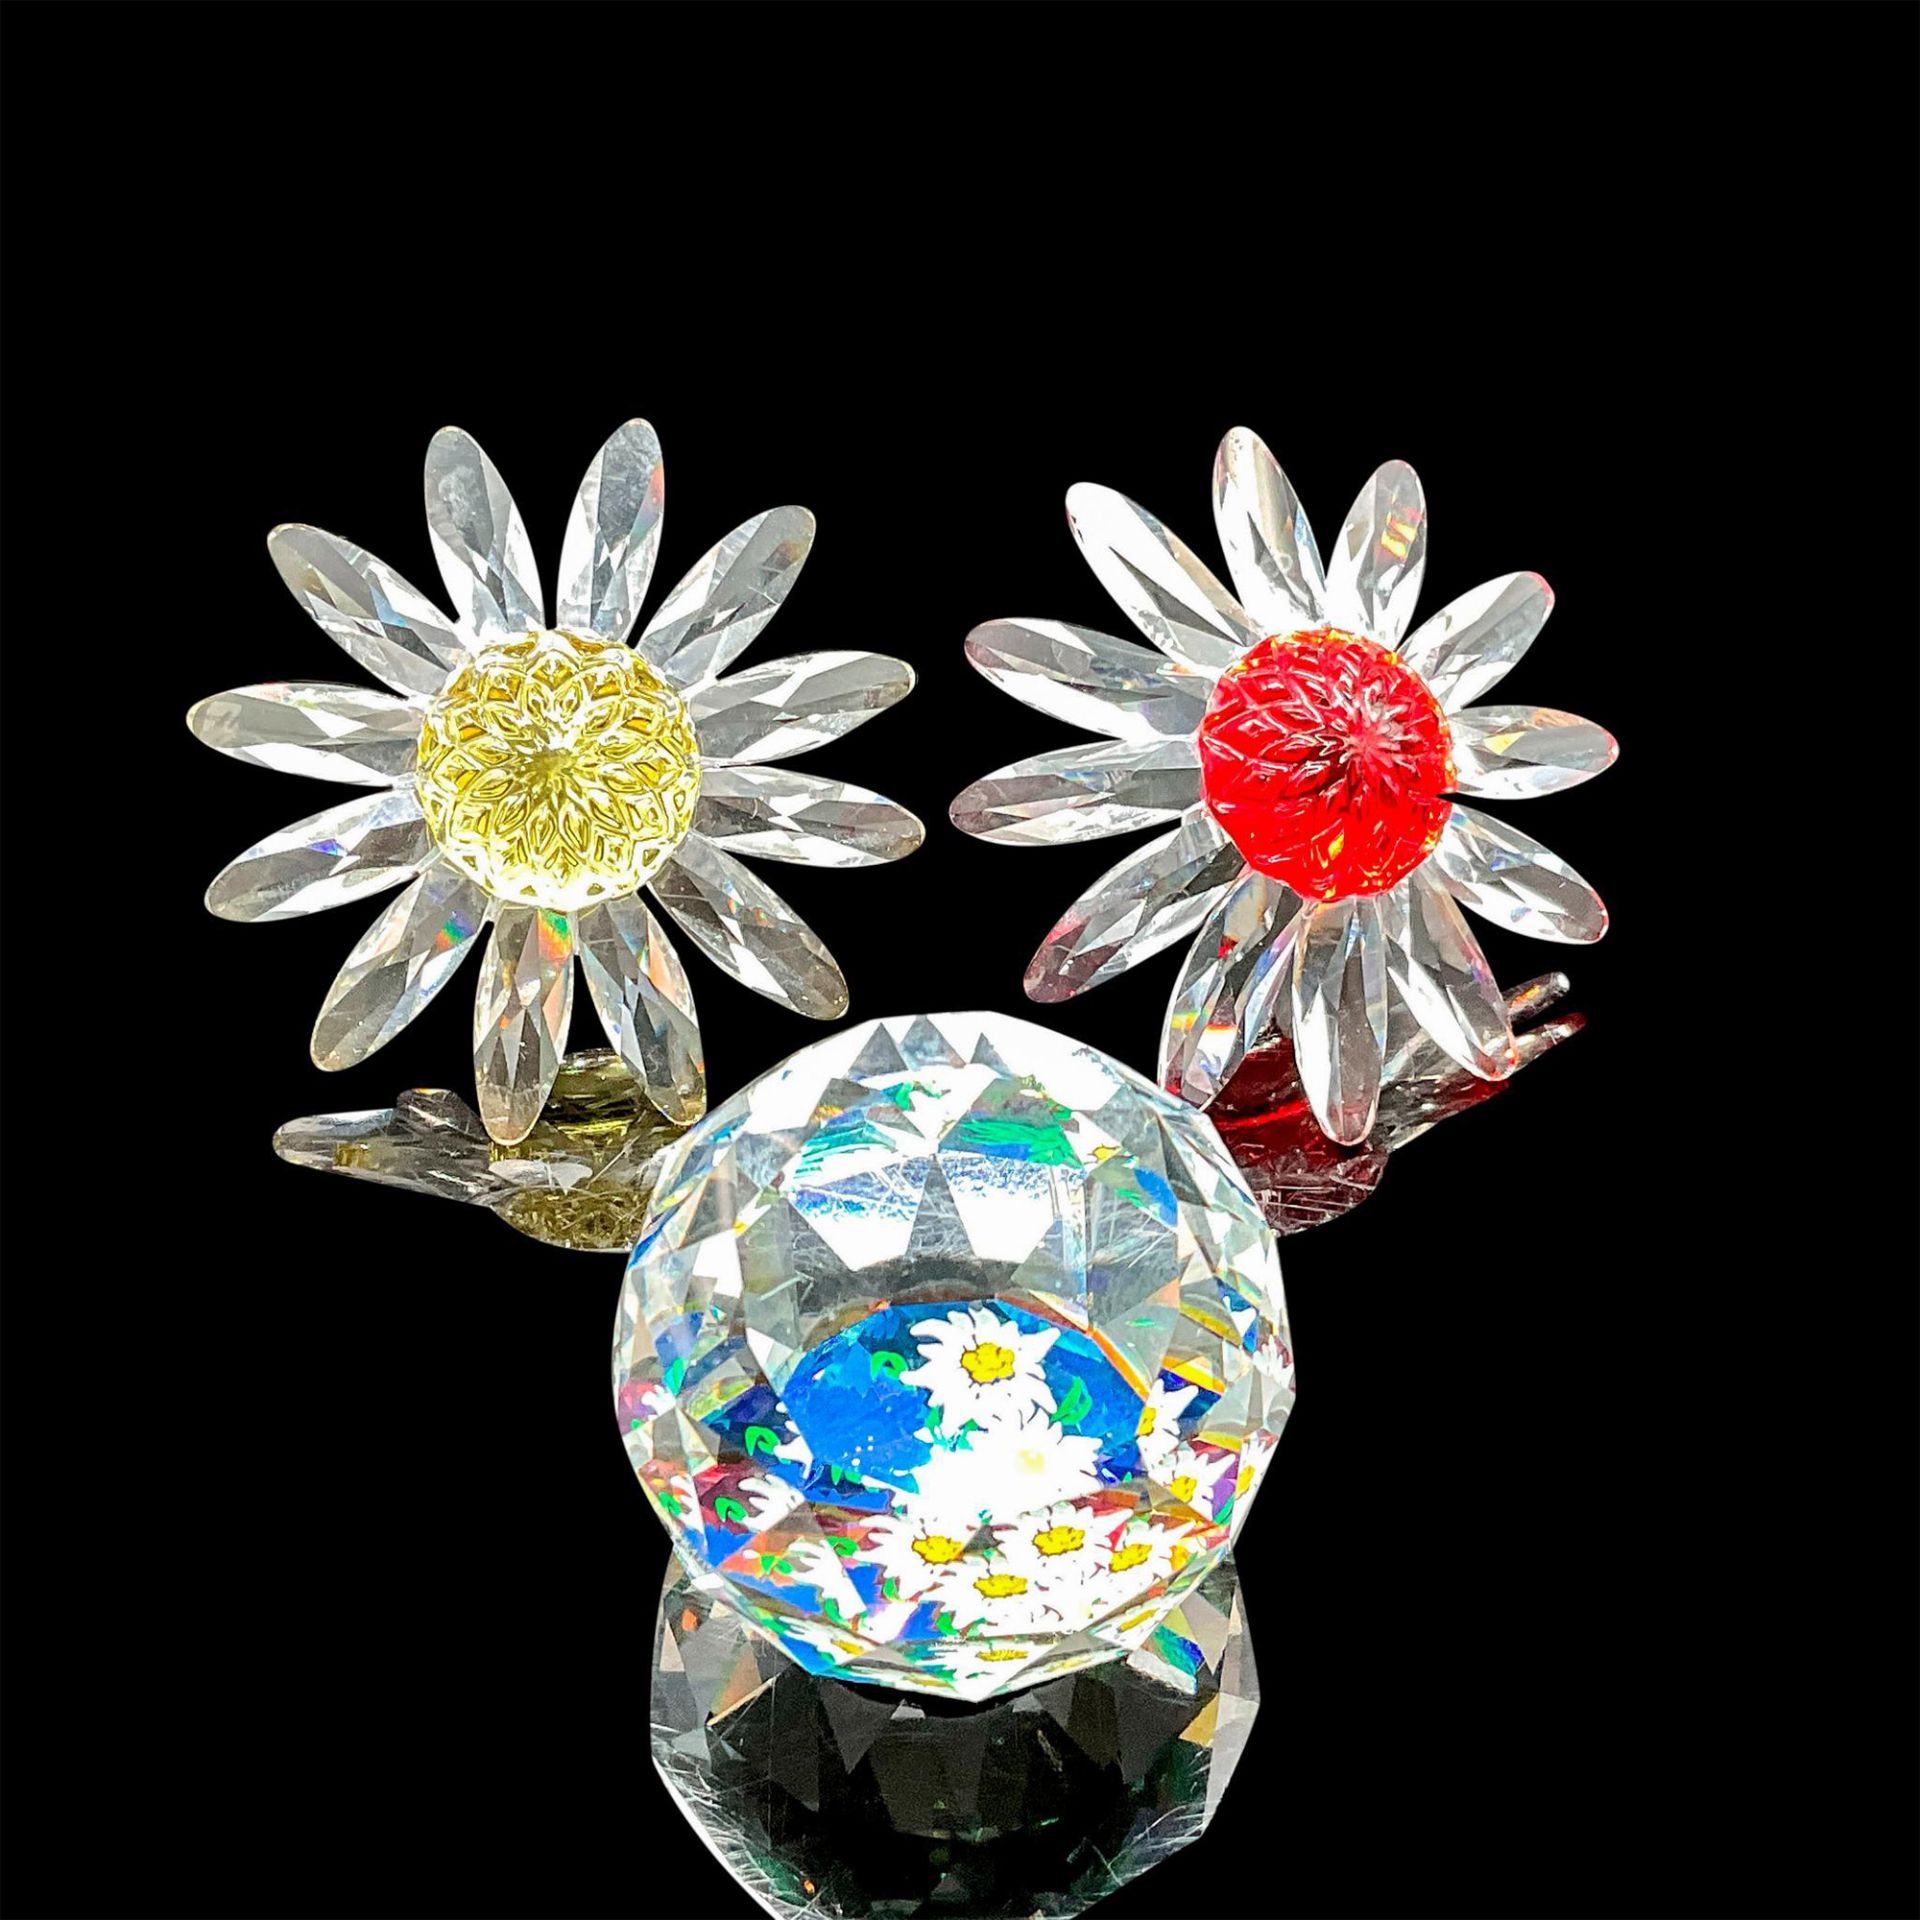 3pc Swarovski Crystal Figurines, Flowers and Paperweight